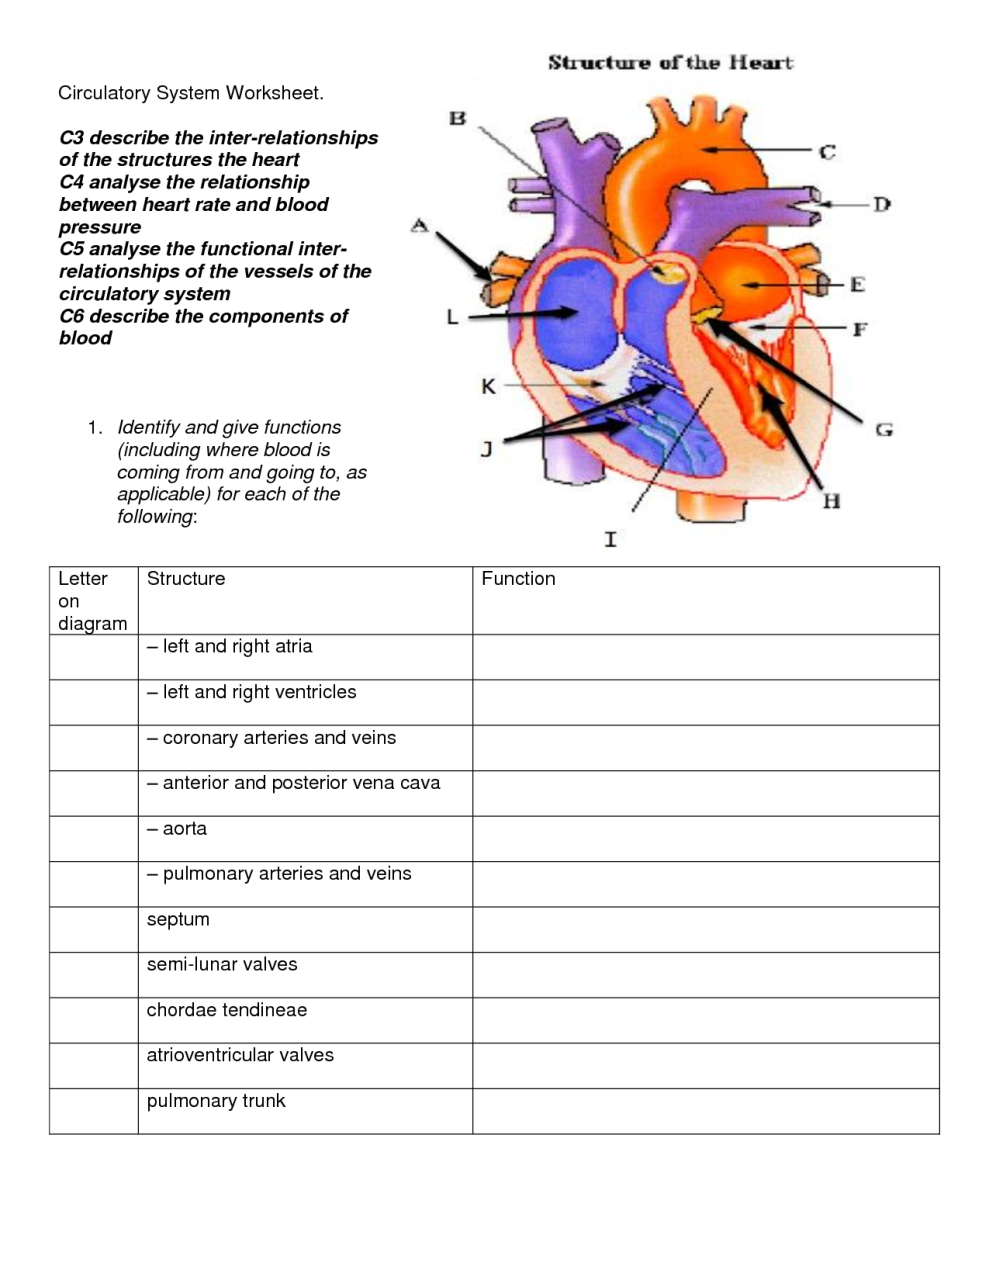 The Human Circulatory System Worksheet Answers